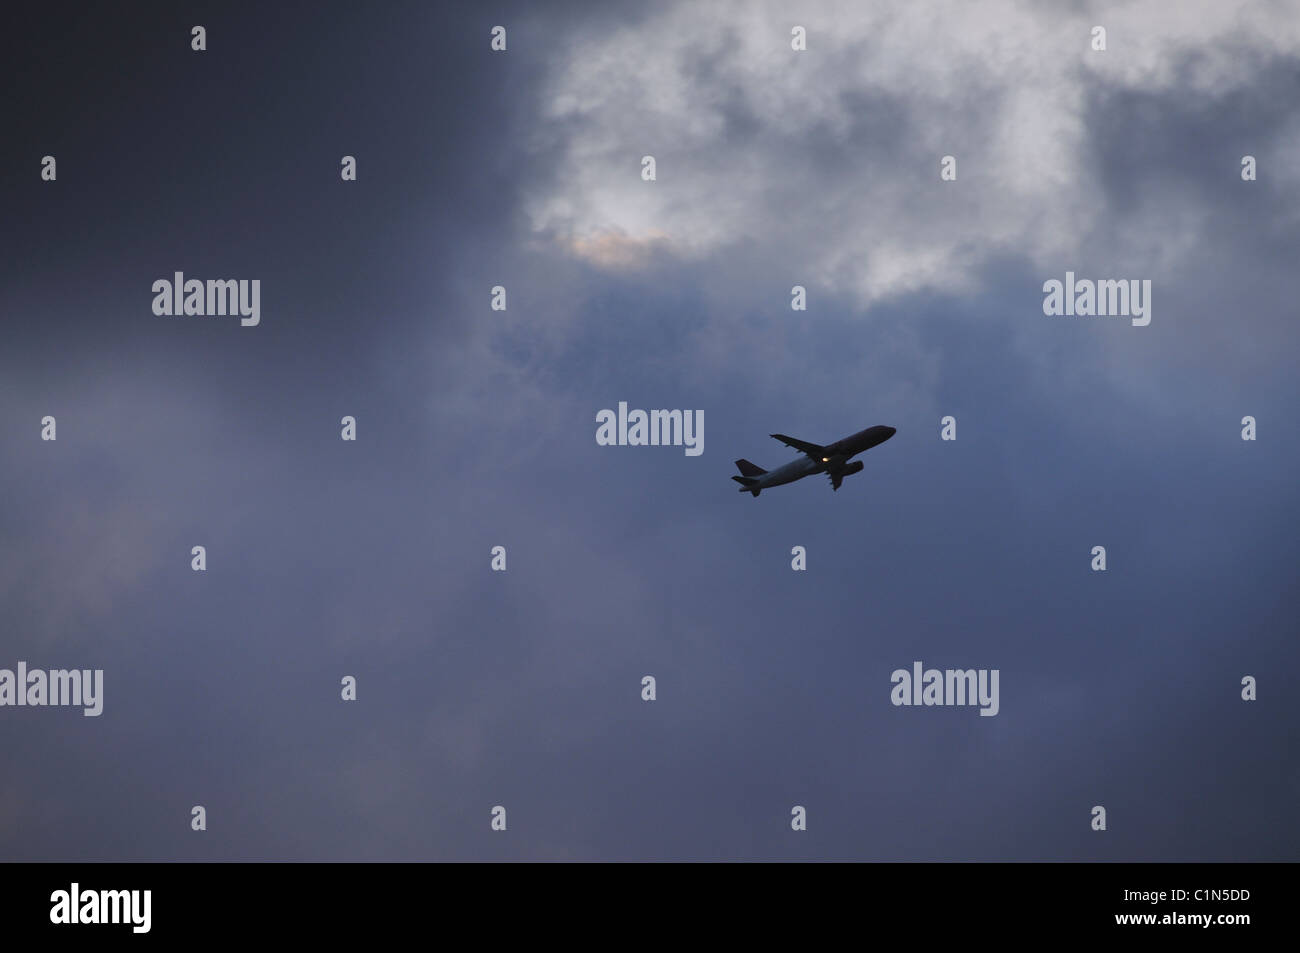 Plane flying at a cloudy sky Stock Photo